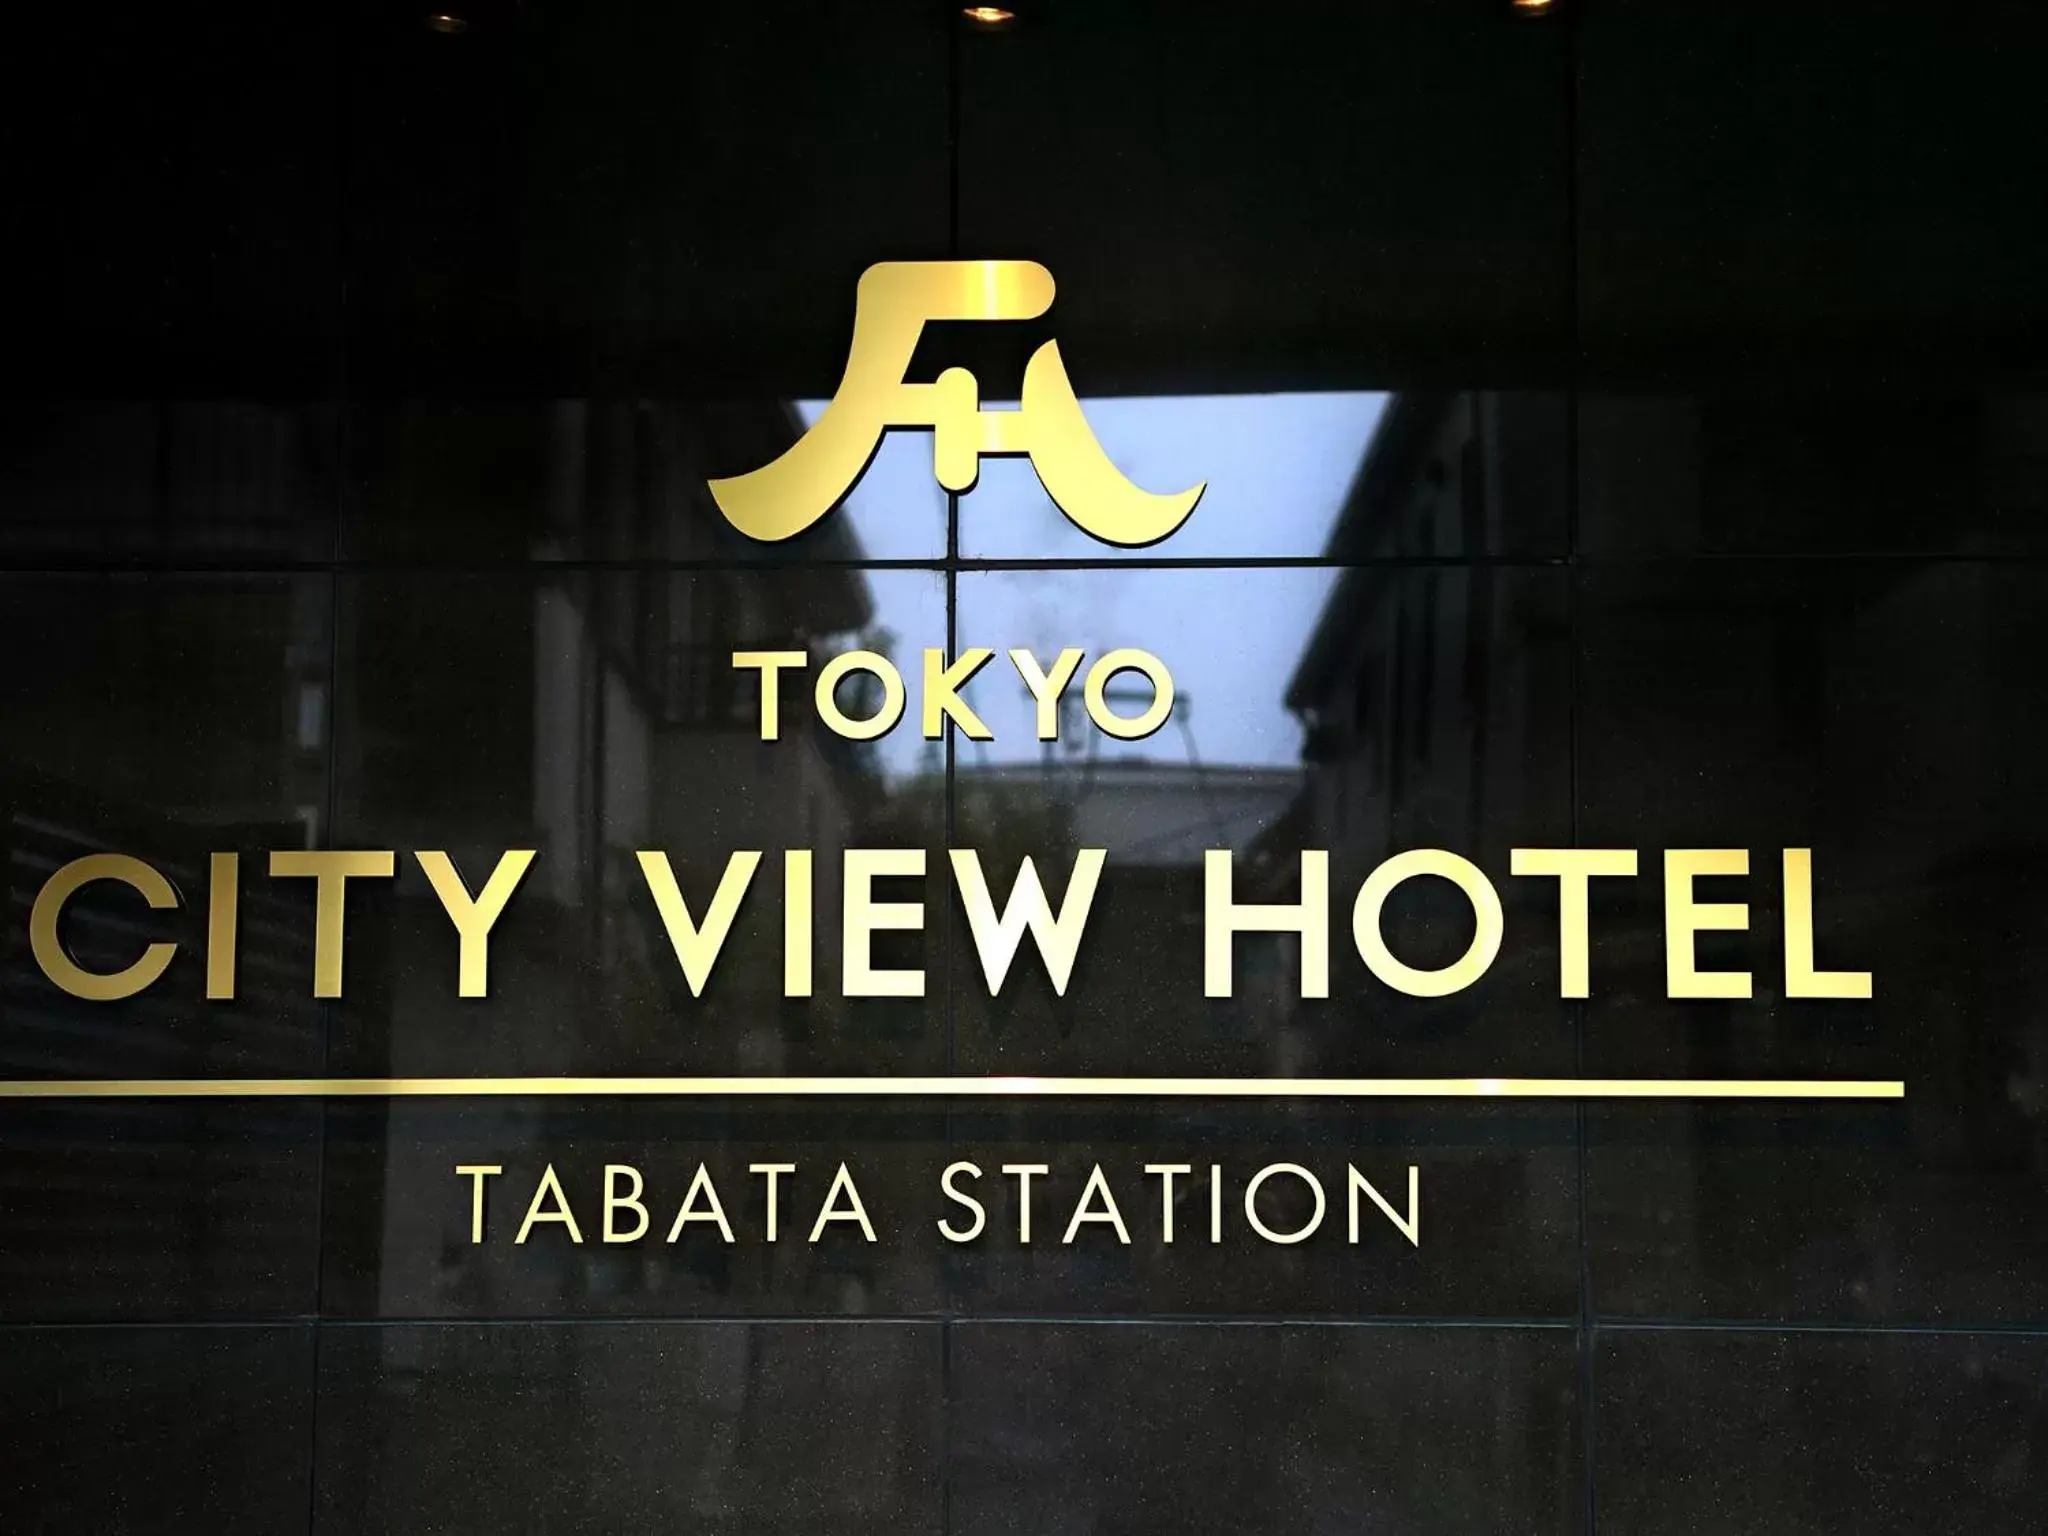 Logo/Certificate/Sign, Property Logo/Sign in Tokyo City View Hotel Tabata Station